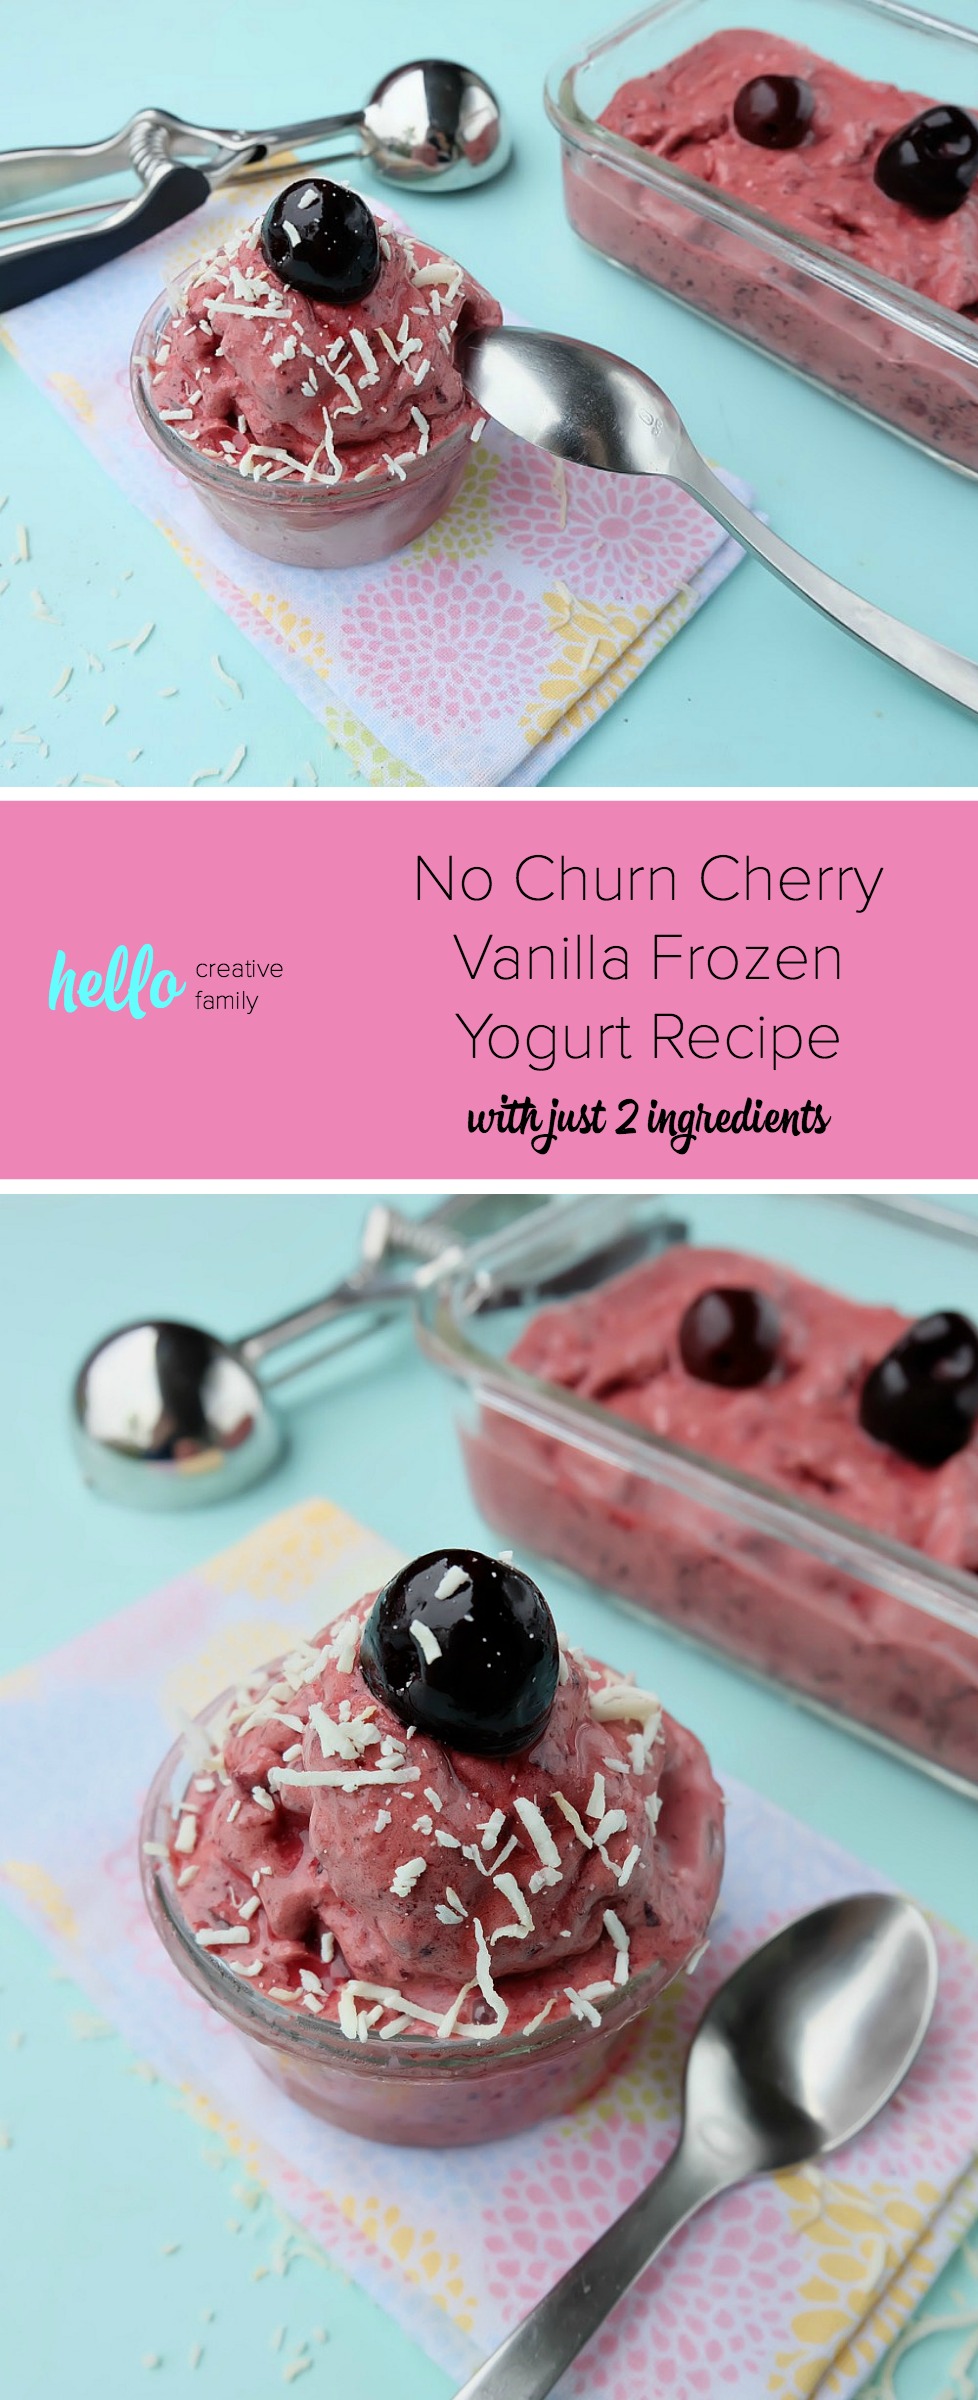 The perfect guilt free frozen summer treat! This no churn healthy cherry vanilla frozen yogurt recipe is easy to make and oh so delicious and sure to become a family friendly favorite. This recipe can be made in 60 seconds or less with two simple ingredients. #dessert #recipe #icecream #healthyrecipe